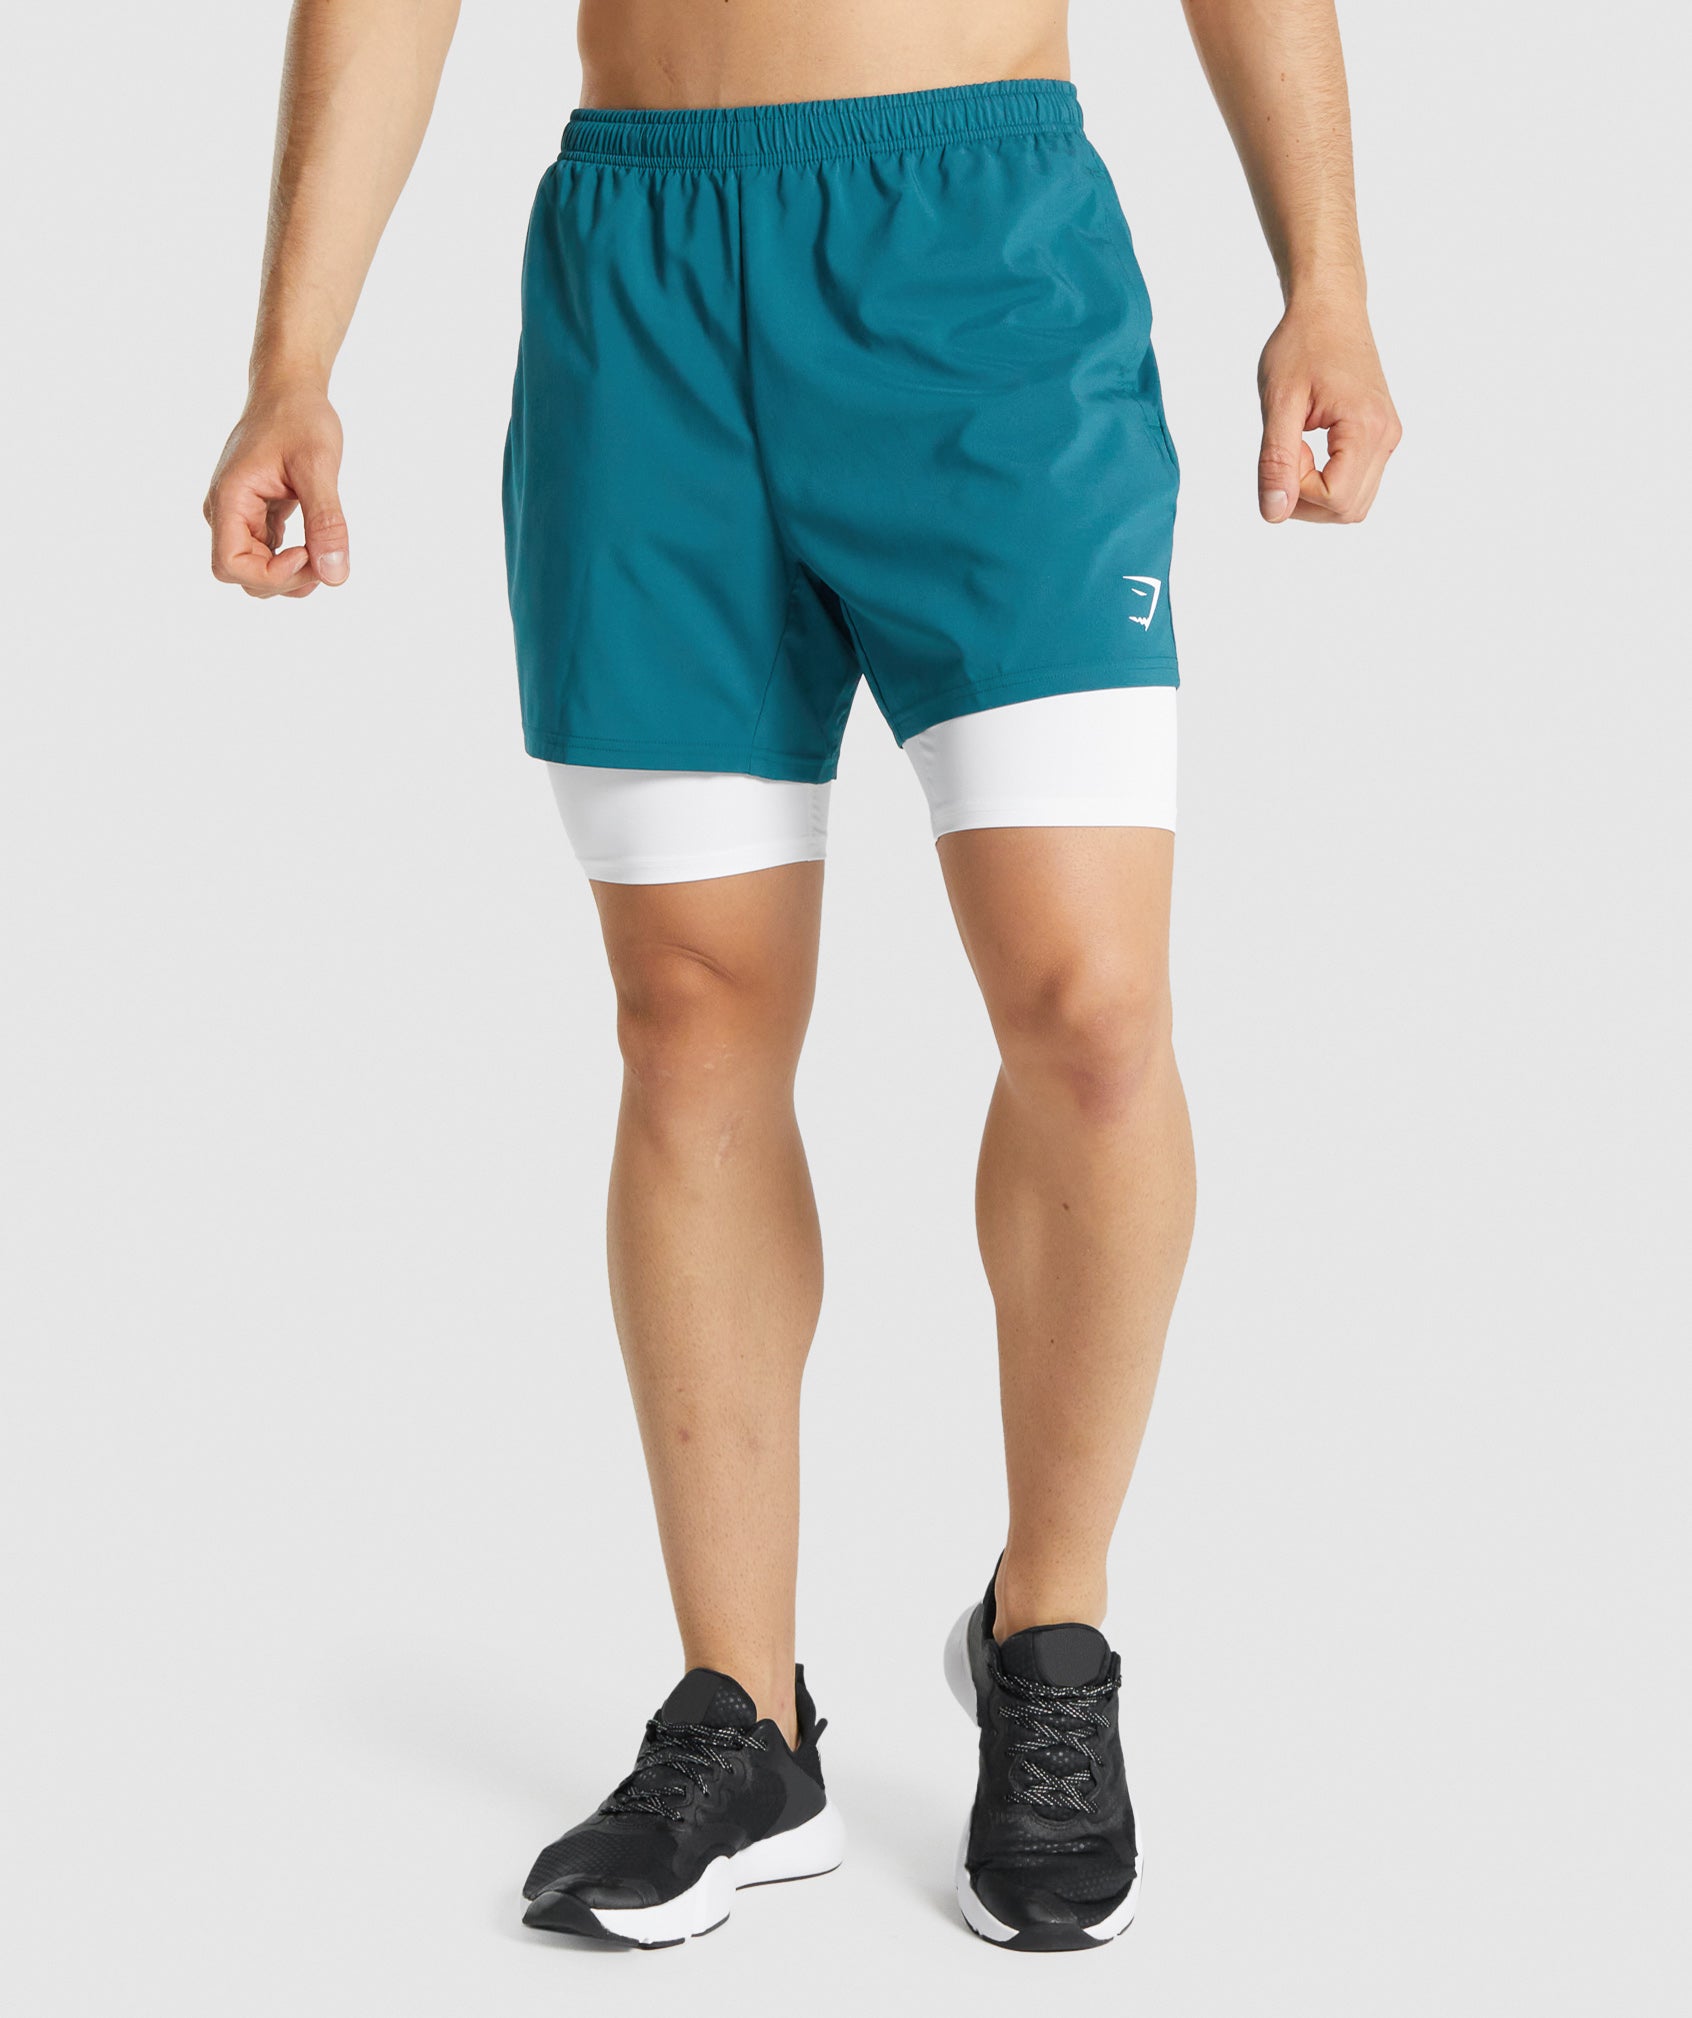 Element Baselayer Shorts in White - view 4